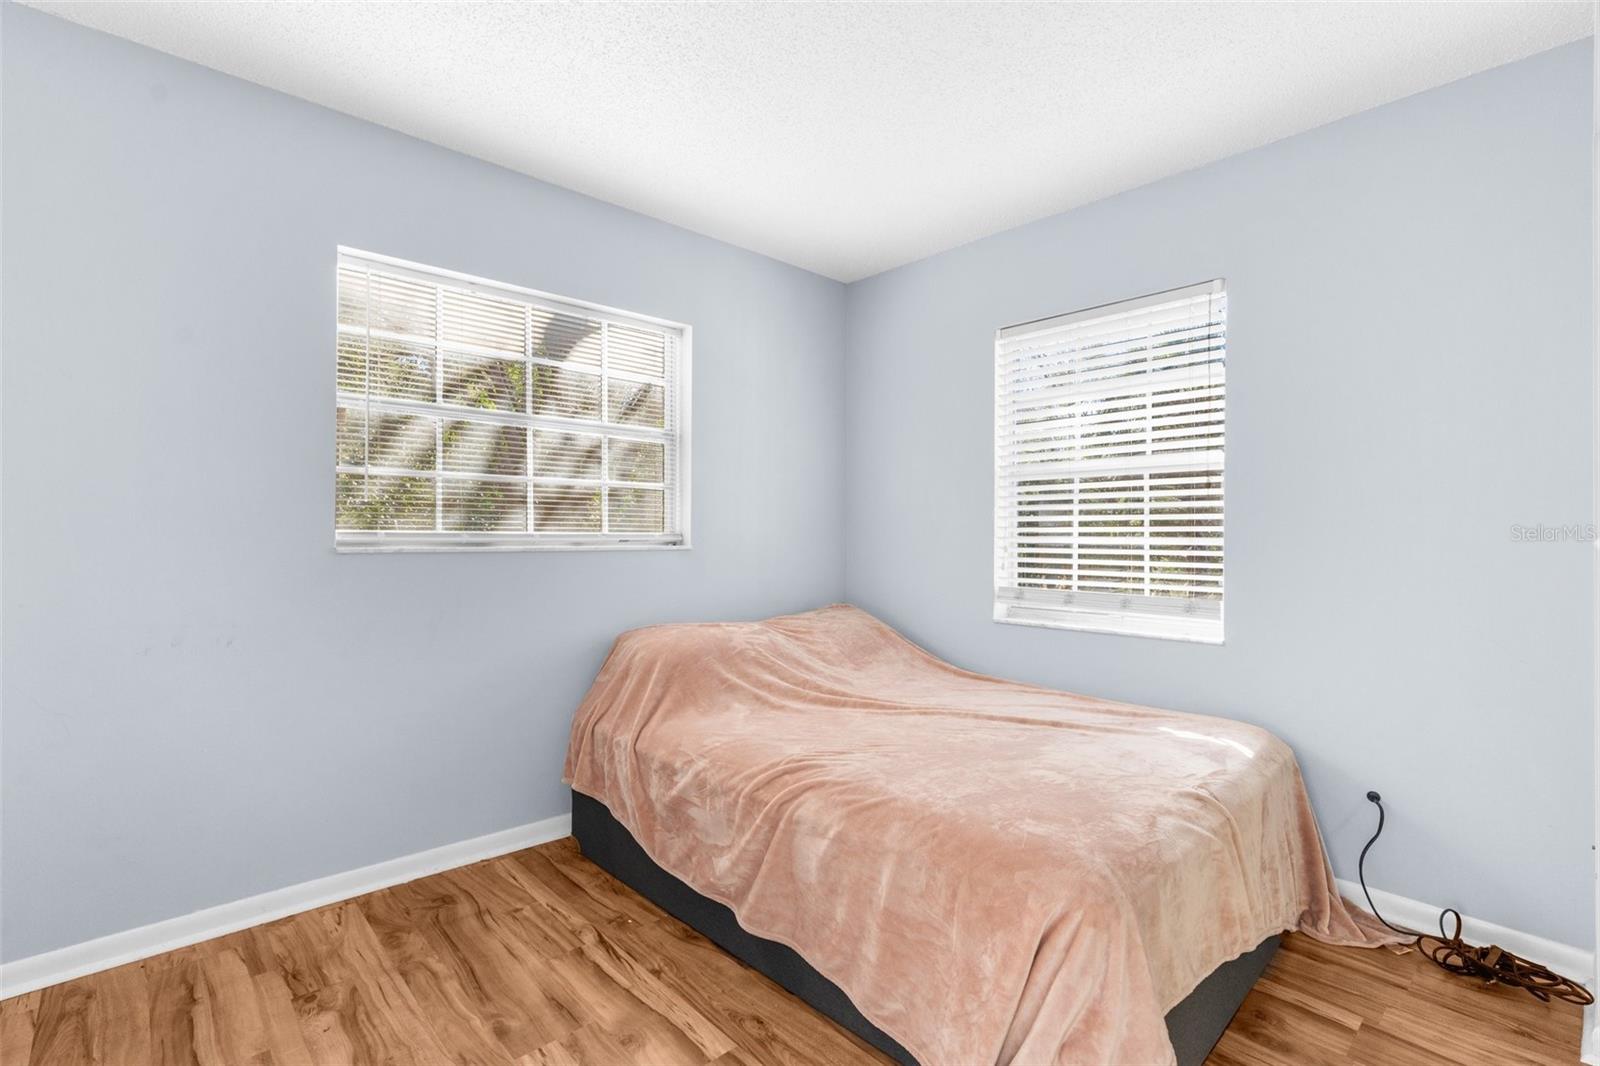 What a Bright and Open Bedroom